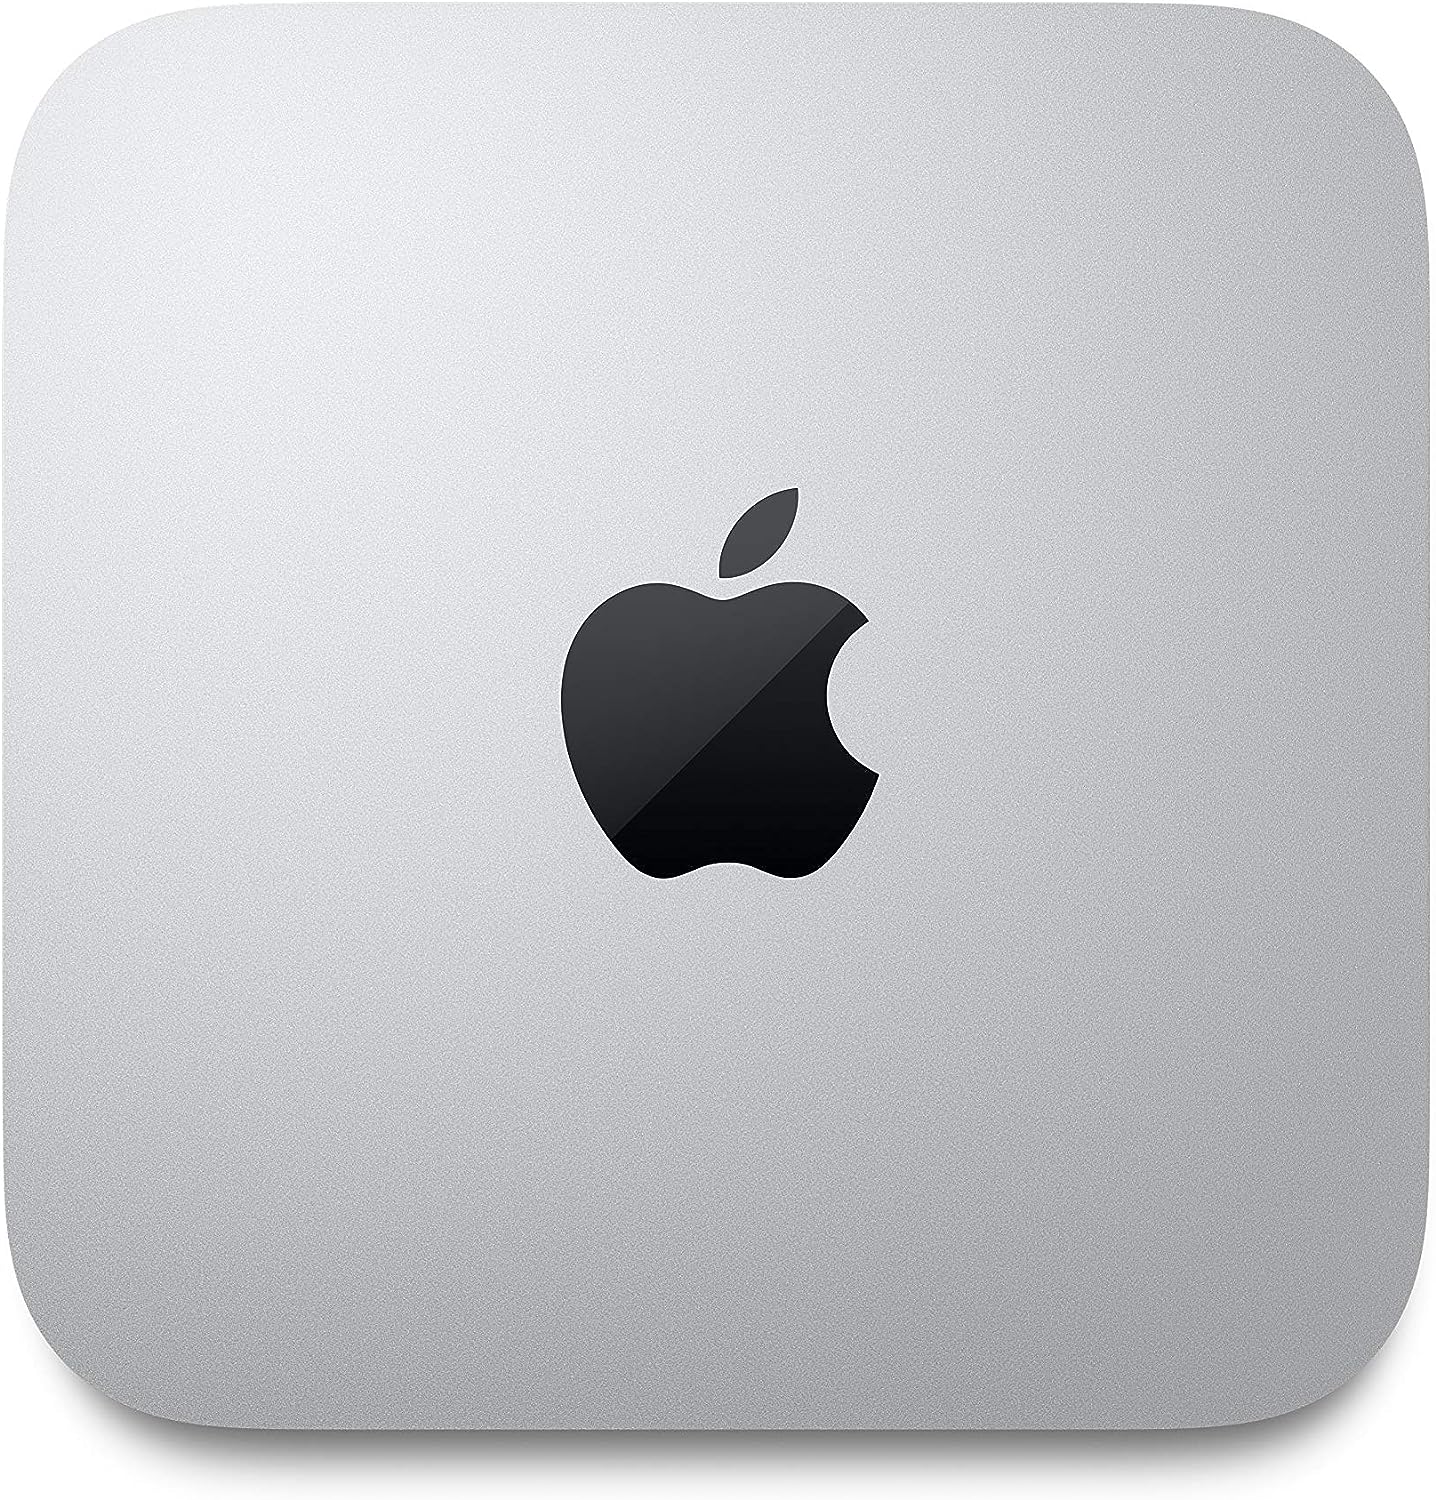 Apple Mac Mini: Compact Mini PC with Apple-designed M1 chip for seamless operations. 0194252092163